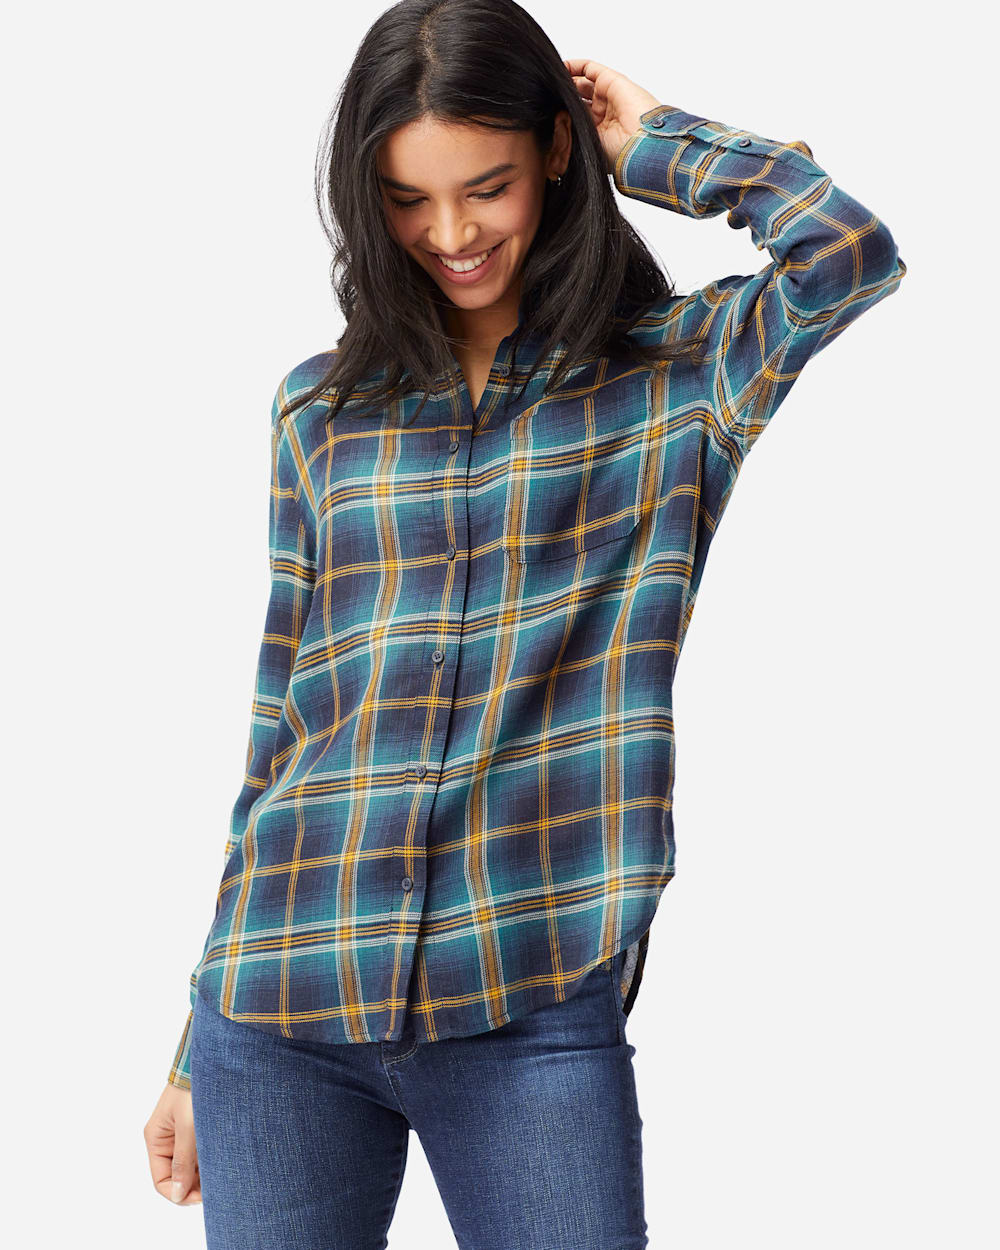 WOMEN'S HELENA BUTTON FRONT SHIRT IN BLUE PLAID image number 1